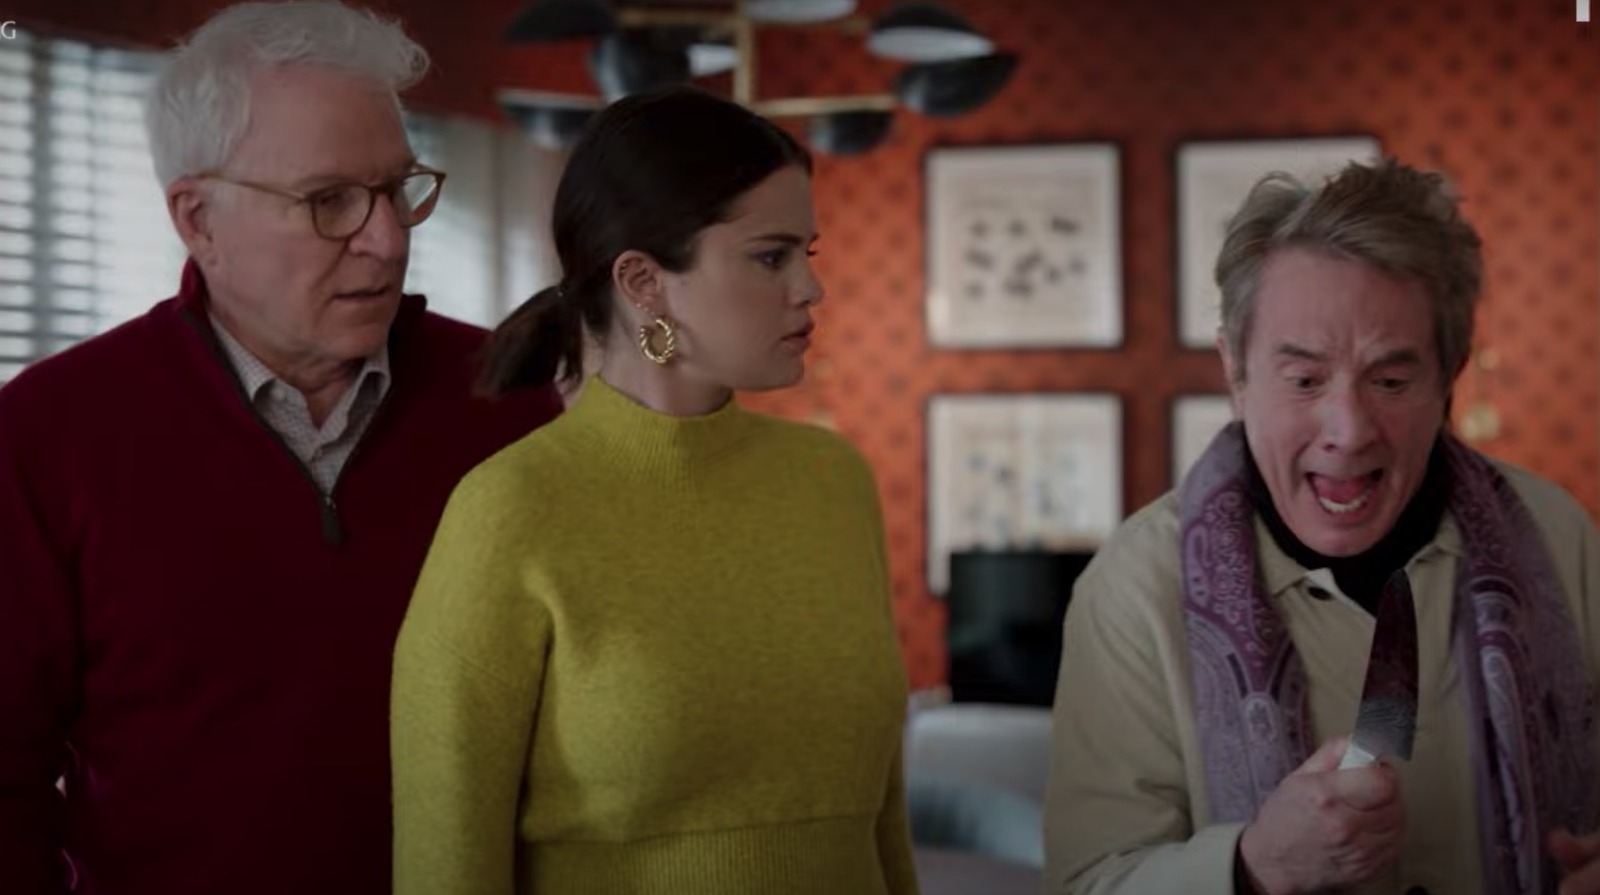 Only Murders In The Building Season 2 Teaser: Steve Martin, Martin Short, And Selena Gomez Have Another Mystery On Their Hands